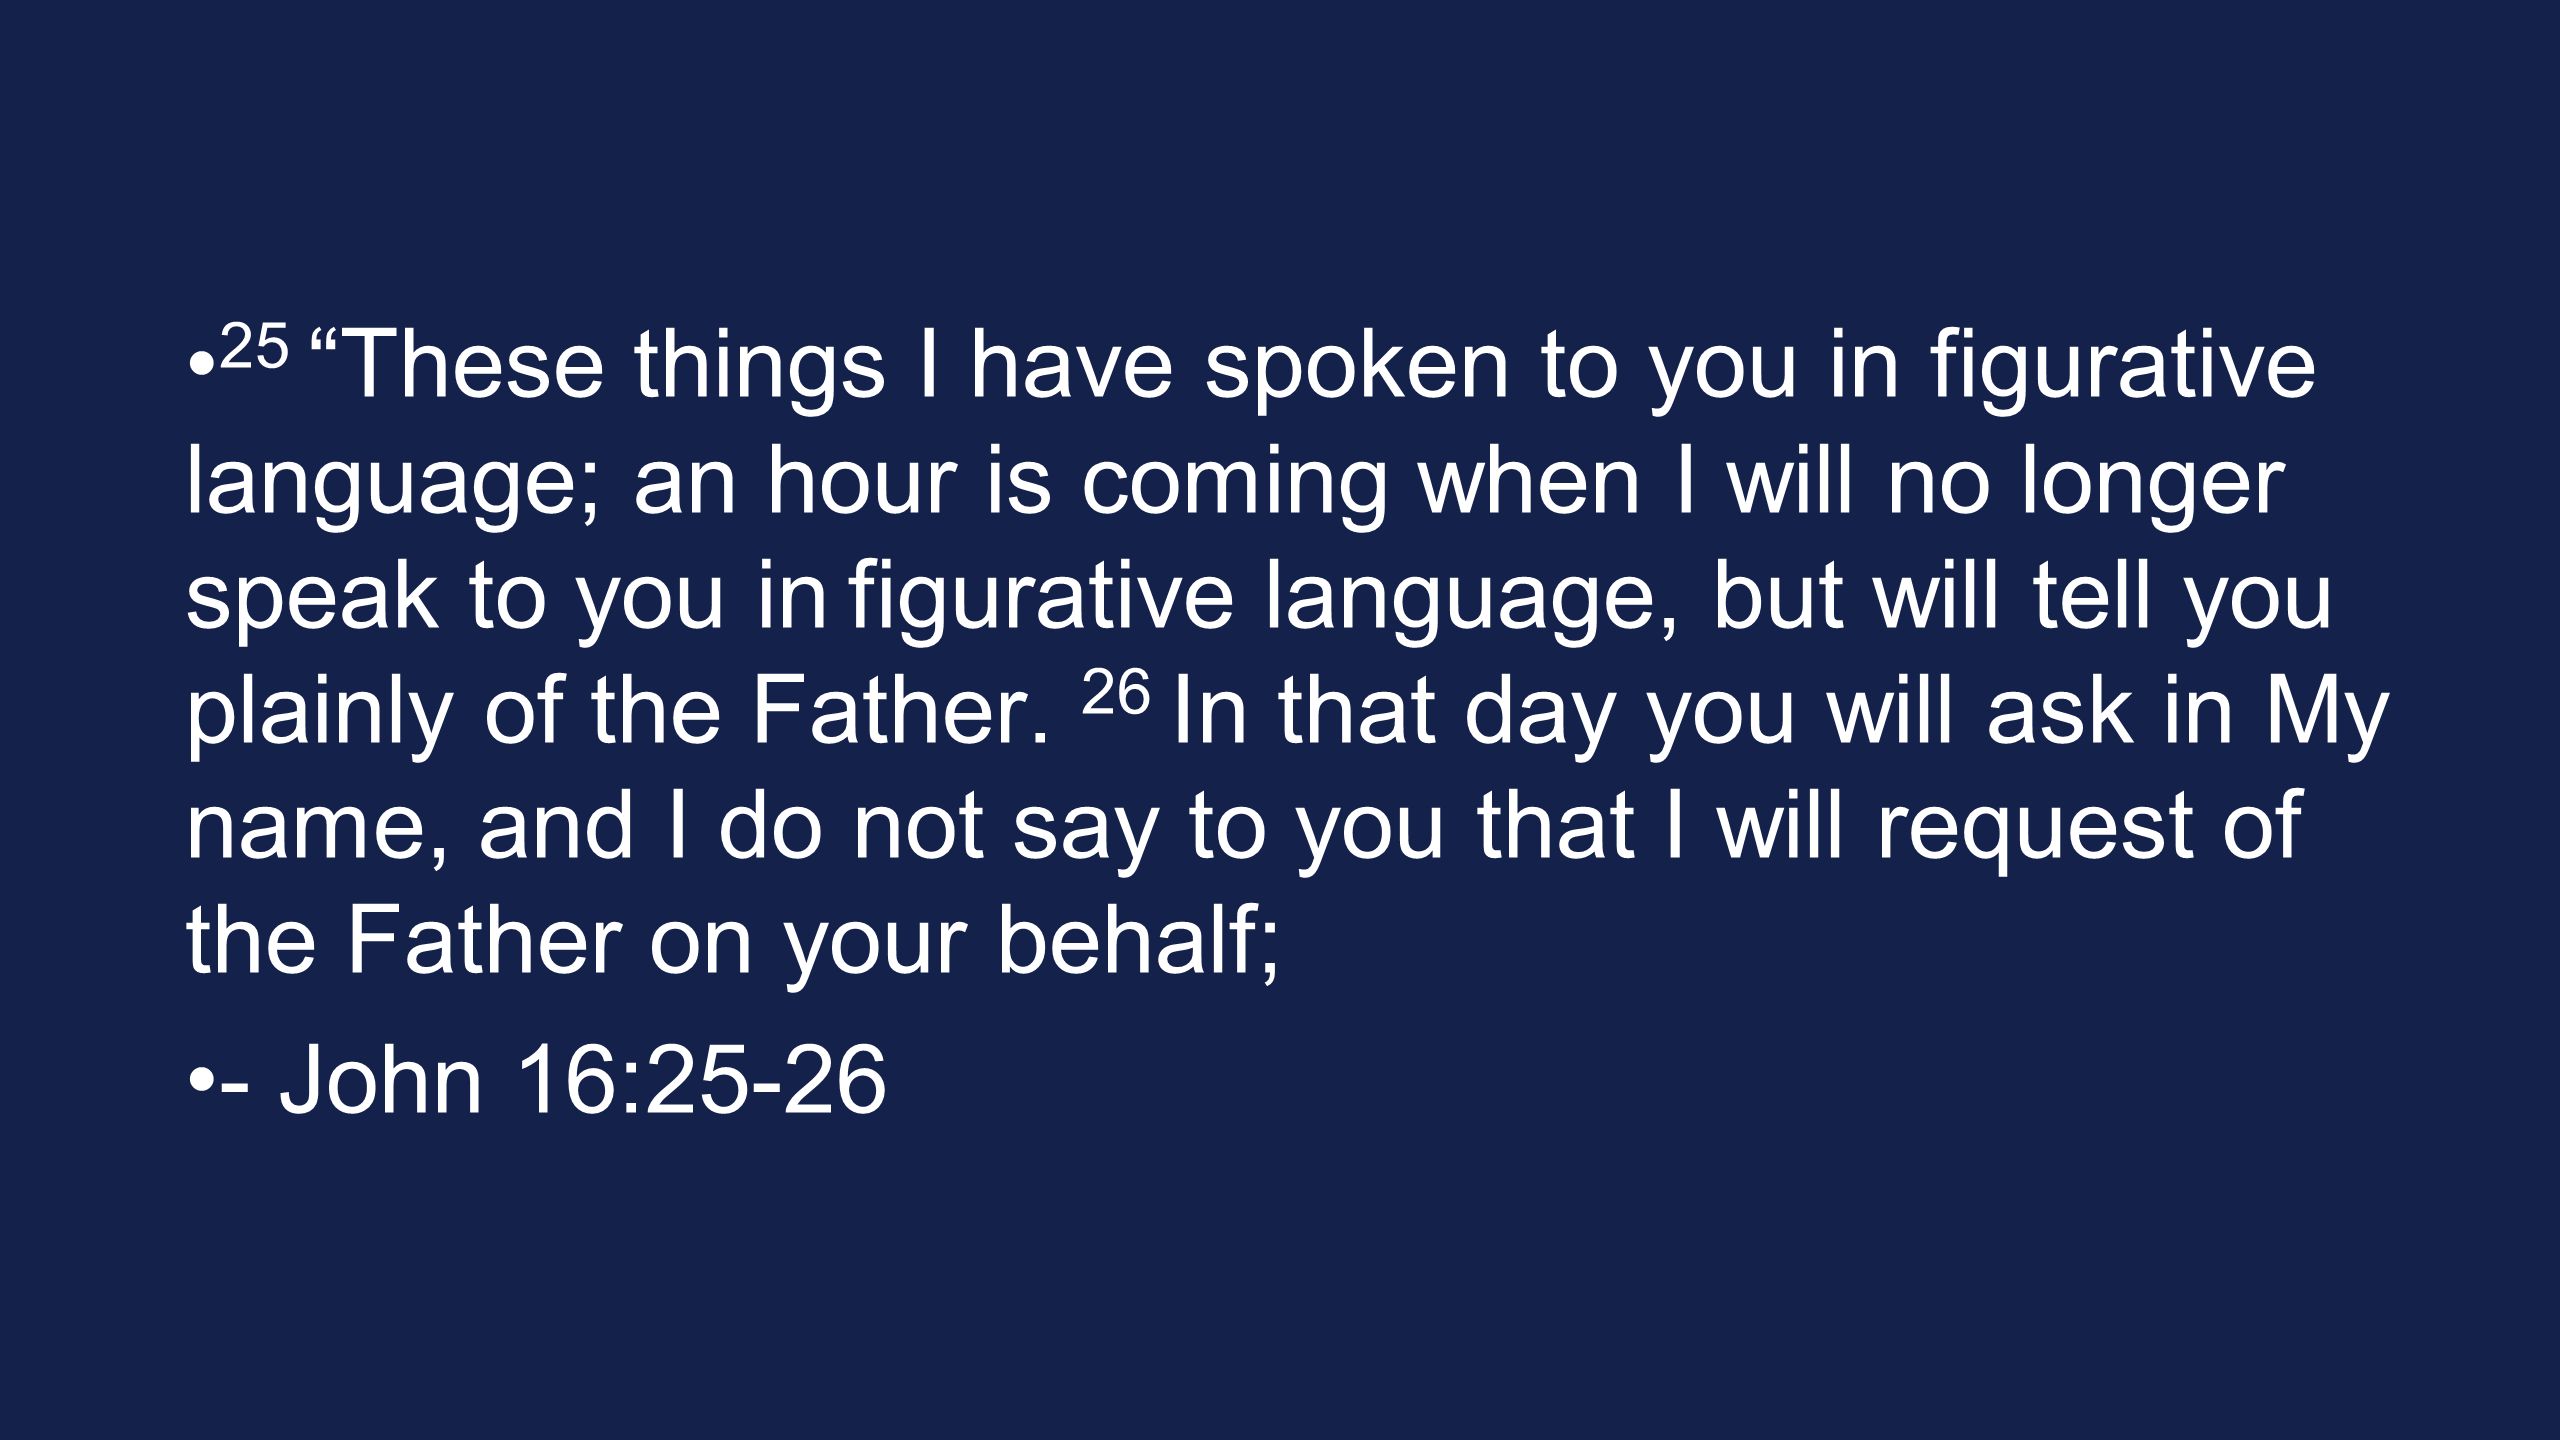 25 These things I have spoken to you in figurative language; an hour is coming when I will no longer speak to you in figurative language, but will tell you plainly of the Father.